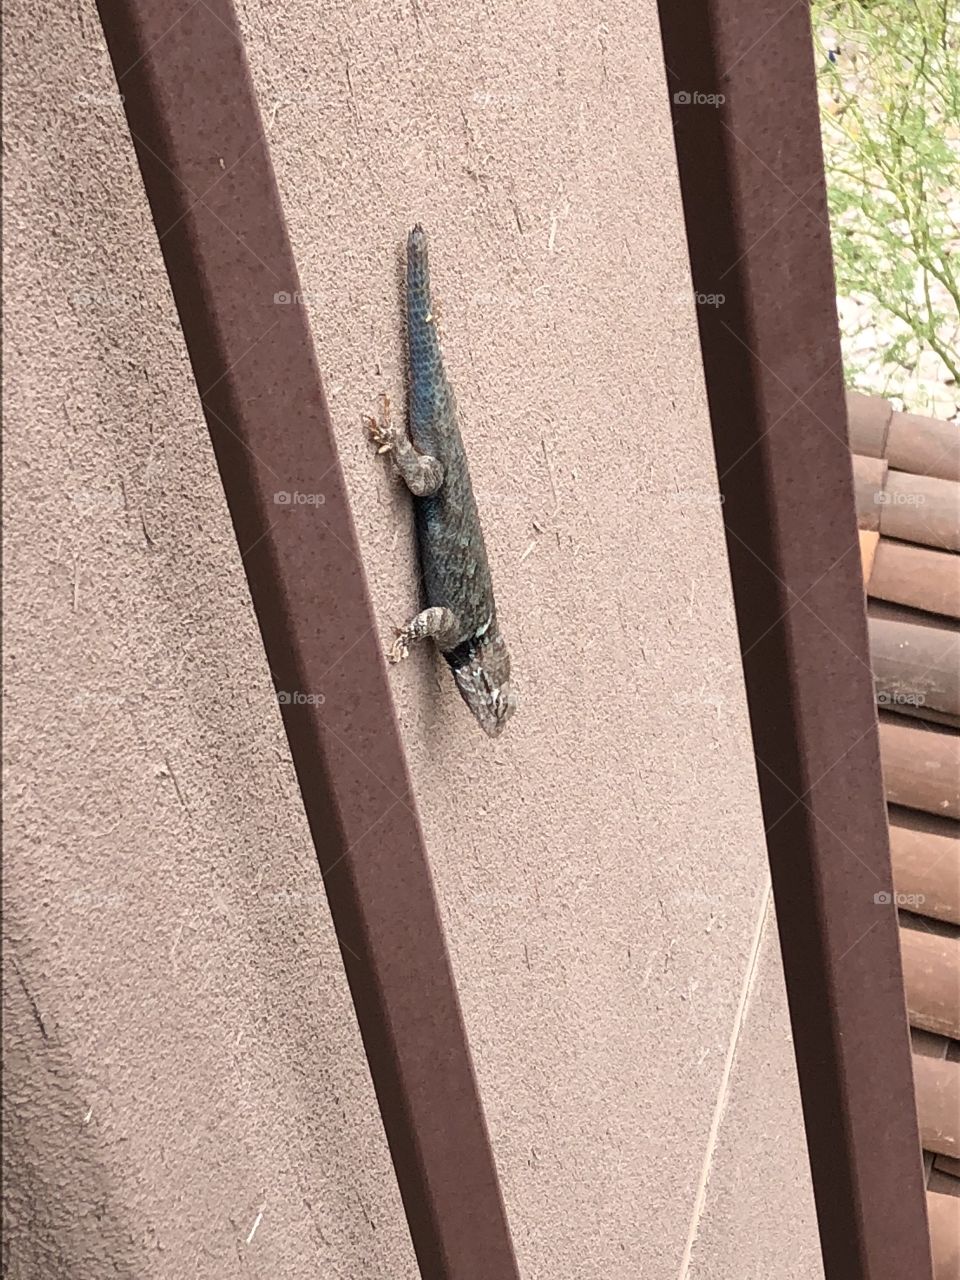 A lizard chilling on the wall in the middle of the desert. 